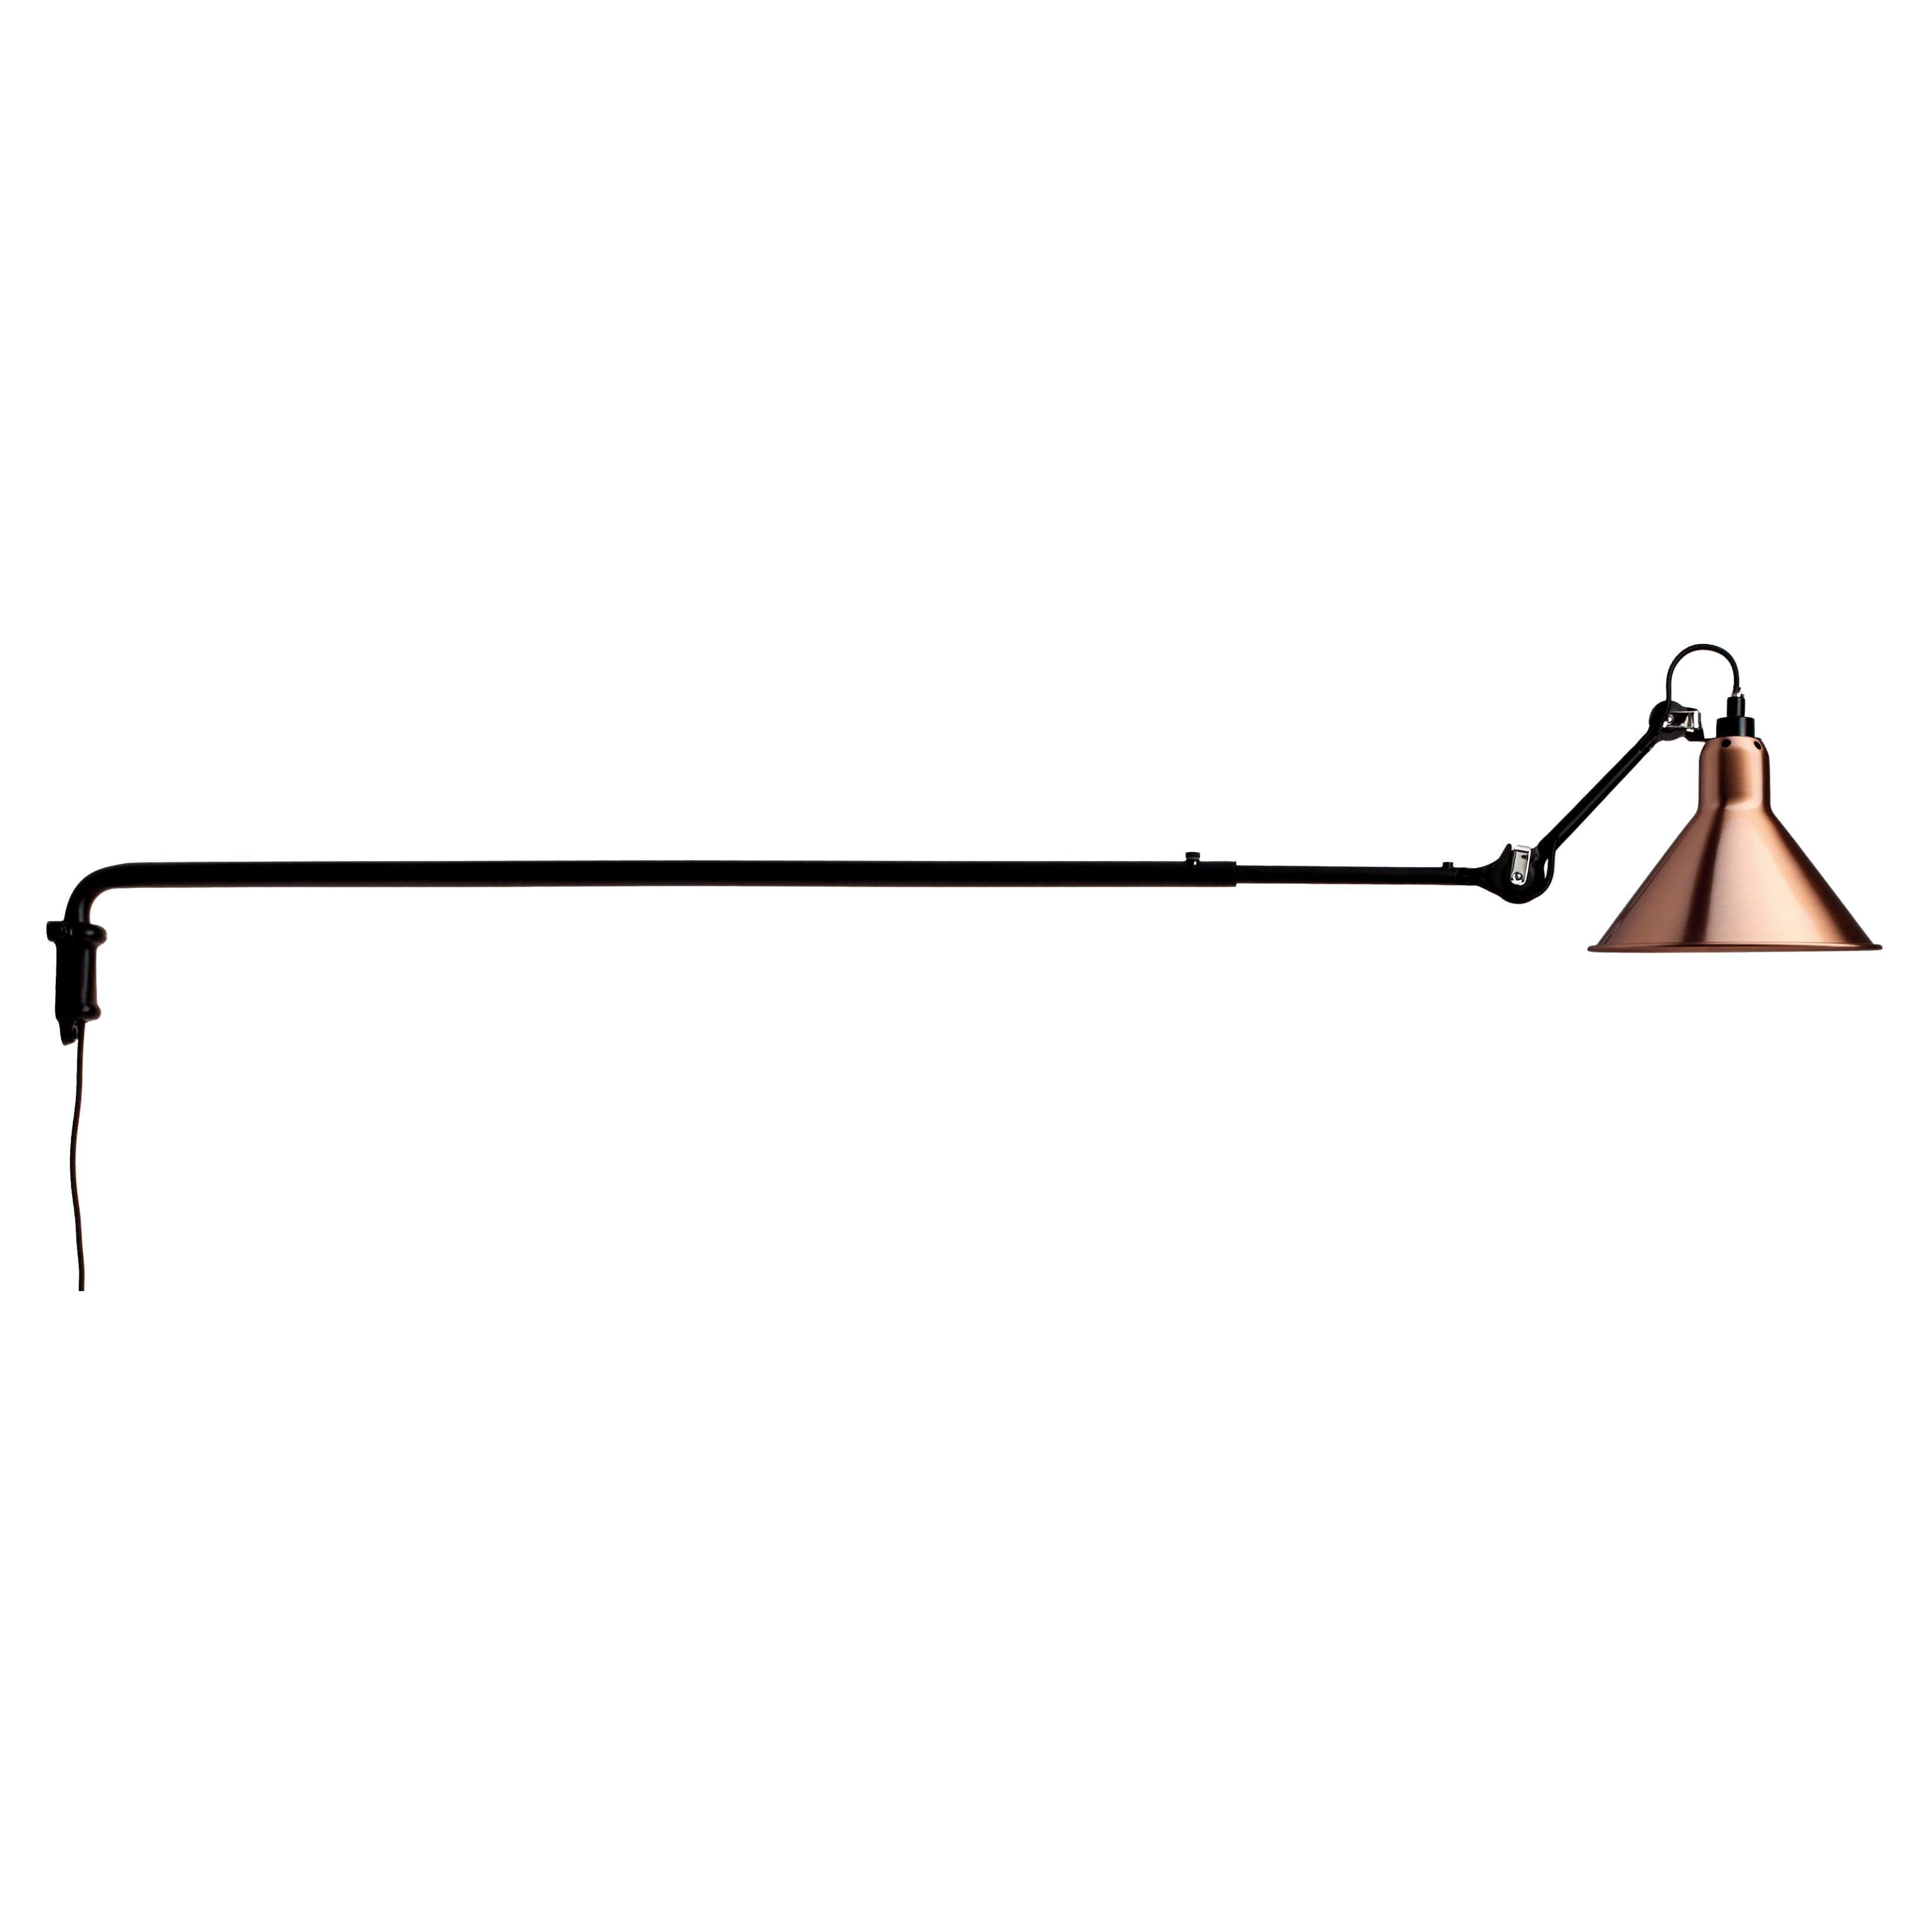 DCW Editions La Lampe Gras N°213 Wall Lamp in Black Arm and Copper Shade For Sale